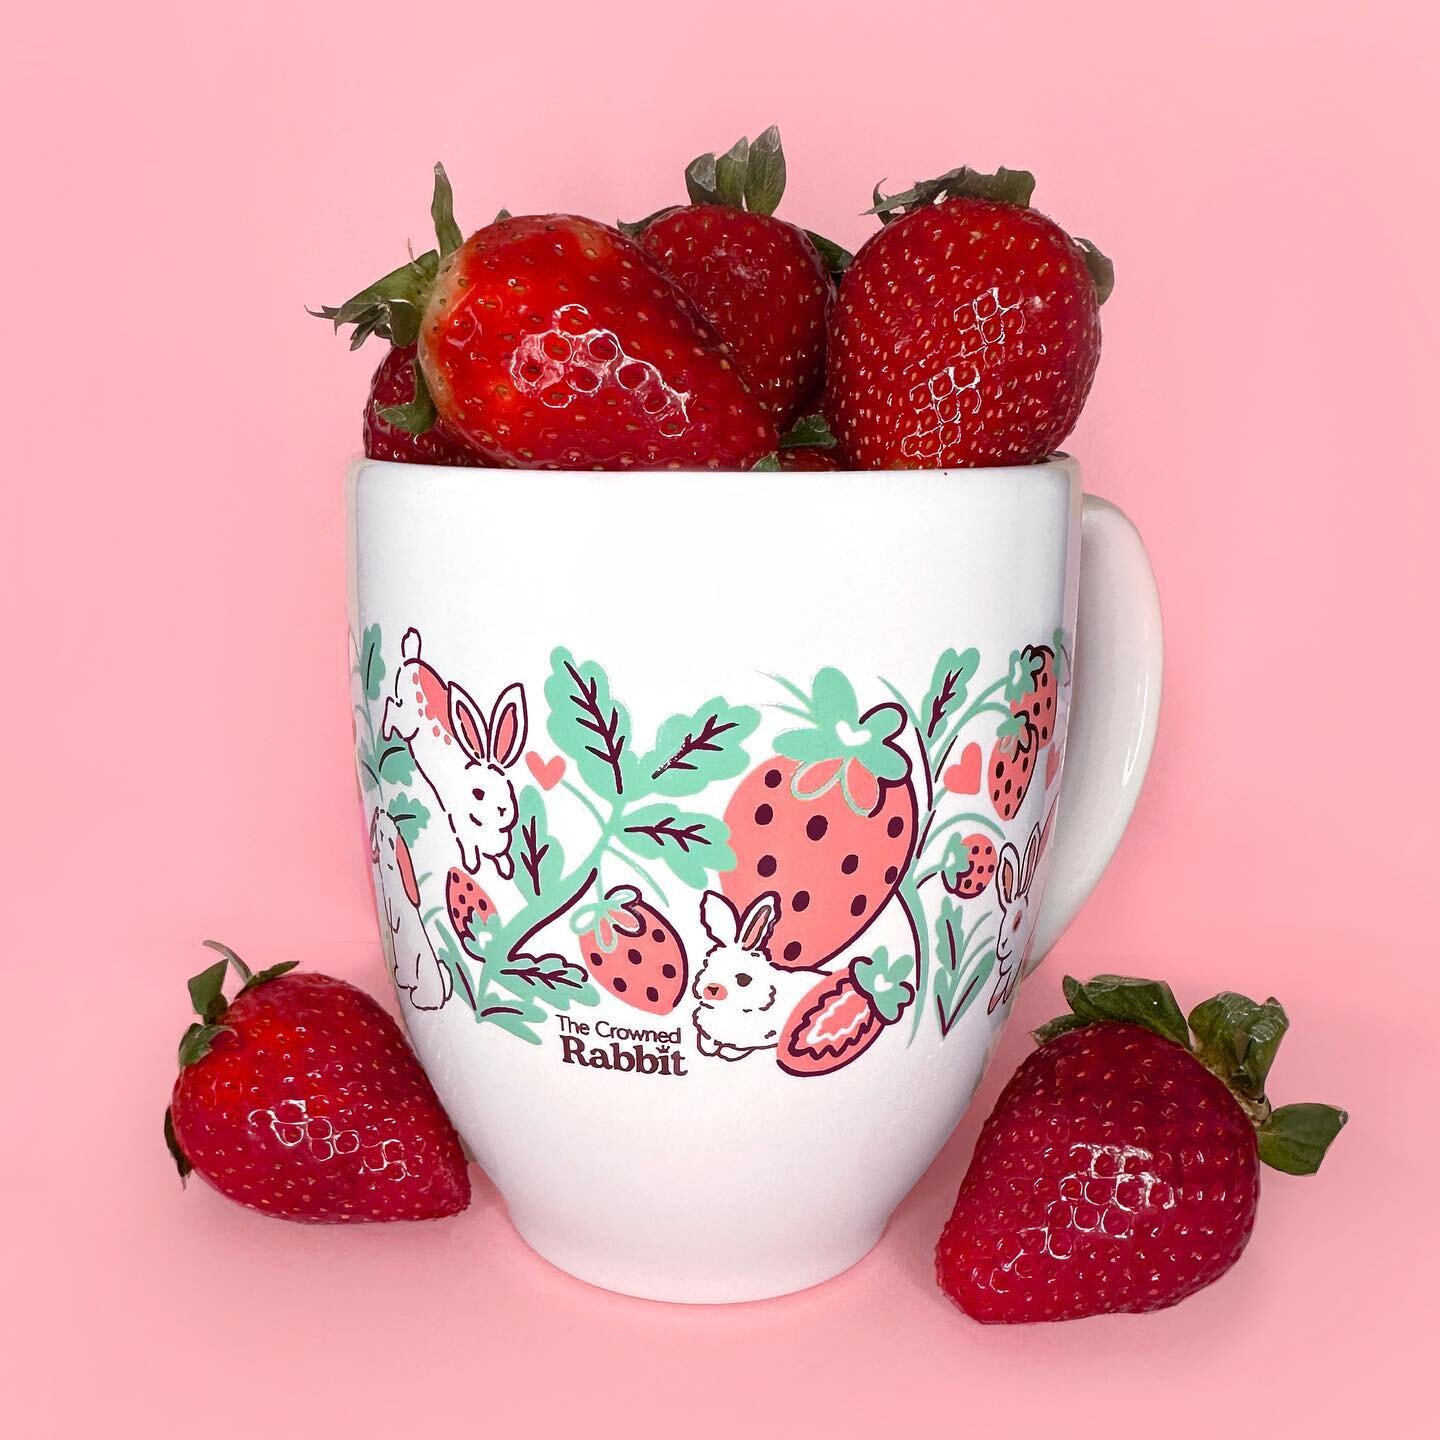 Strawberry mug sample is here! The mug is such a great size and the artwork came out so pretty 🥹 This ceramic mug holds 15oz of your favorite drink and is dishwasher and microwave safe. The artwork is permanent and printed with eco-friendly inks mad